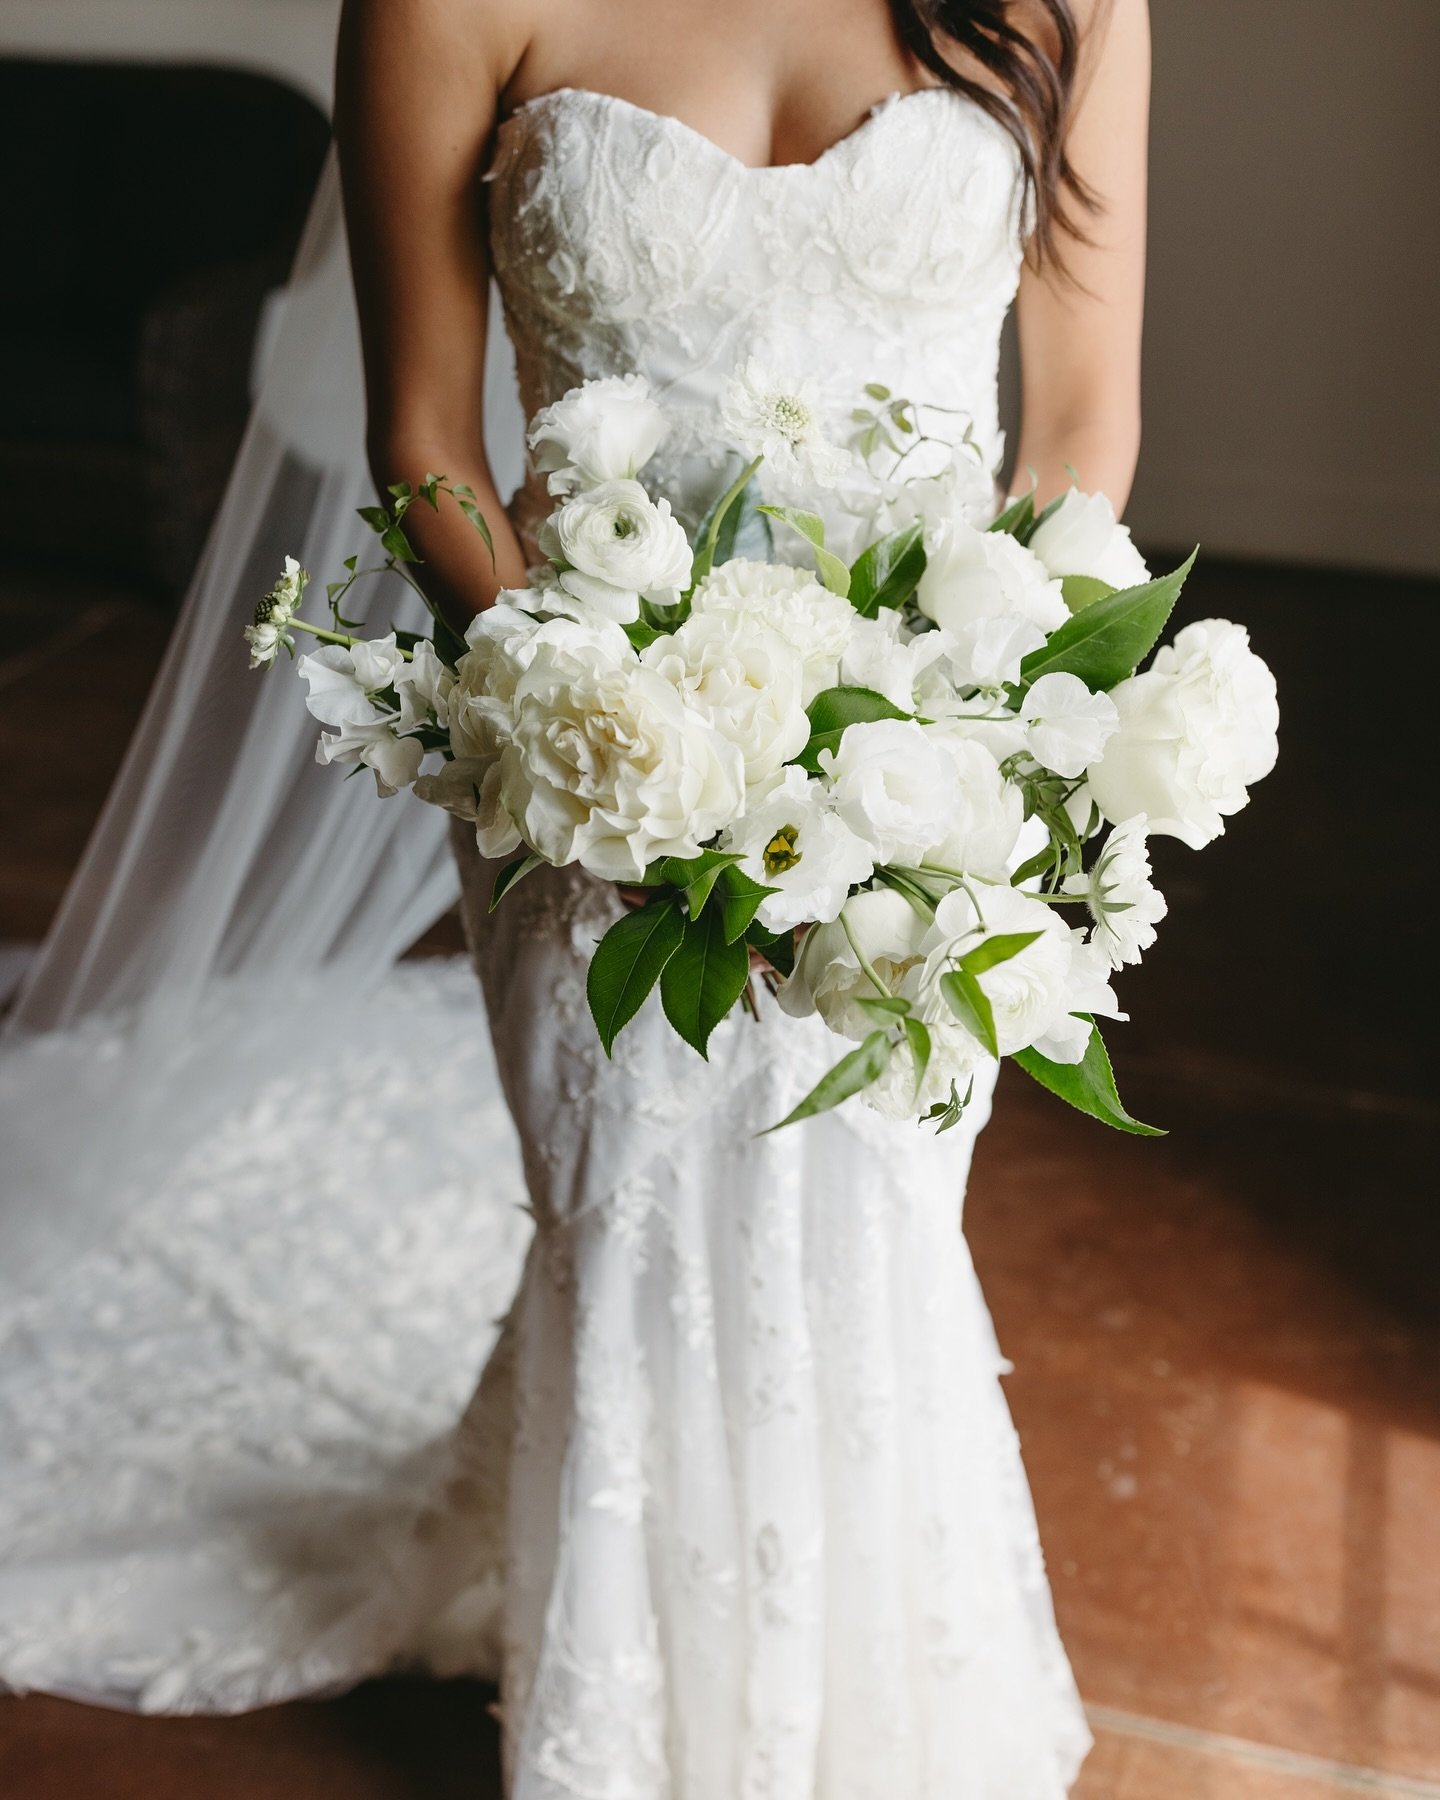 This bouquet, this dress, this bride, this location! Love the bridal suit at Casino San Clemente! 

Florist | @beautifulsavageflowers 

Planner | @sunshineeventsco 

Venue | @thecasinosc 

Photographer | @lexandthelotus